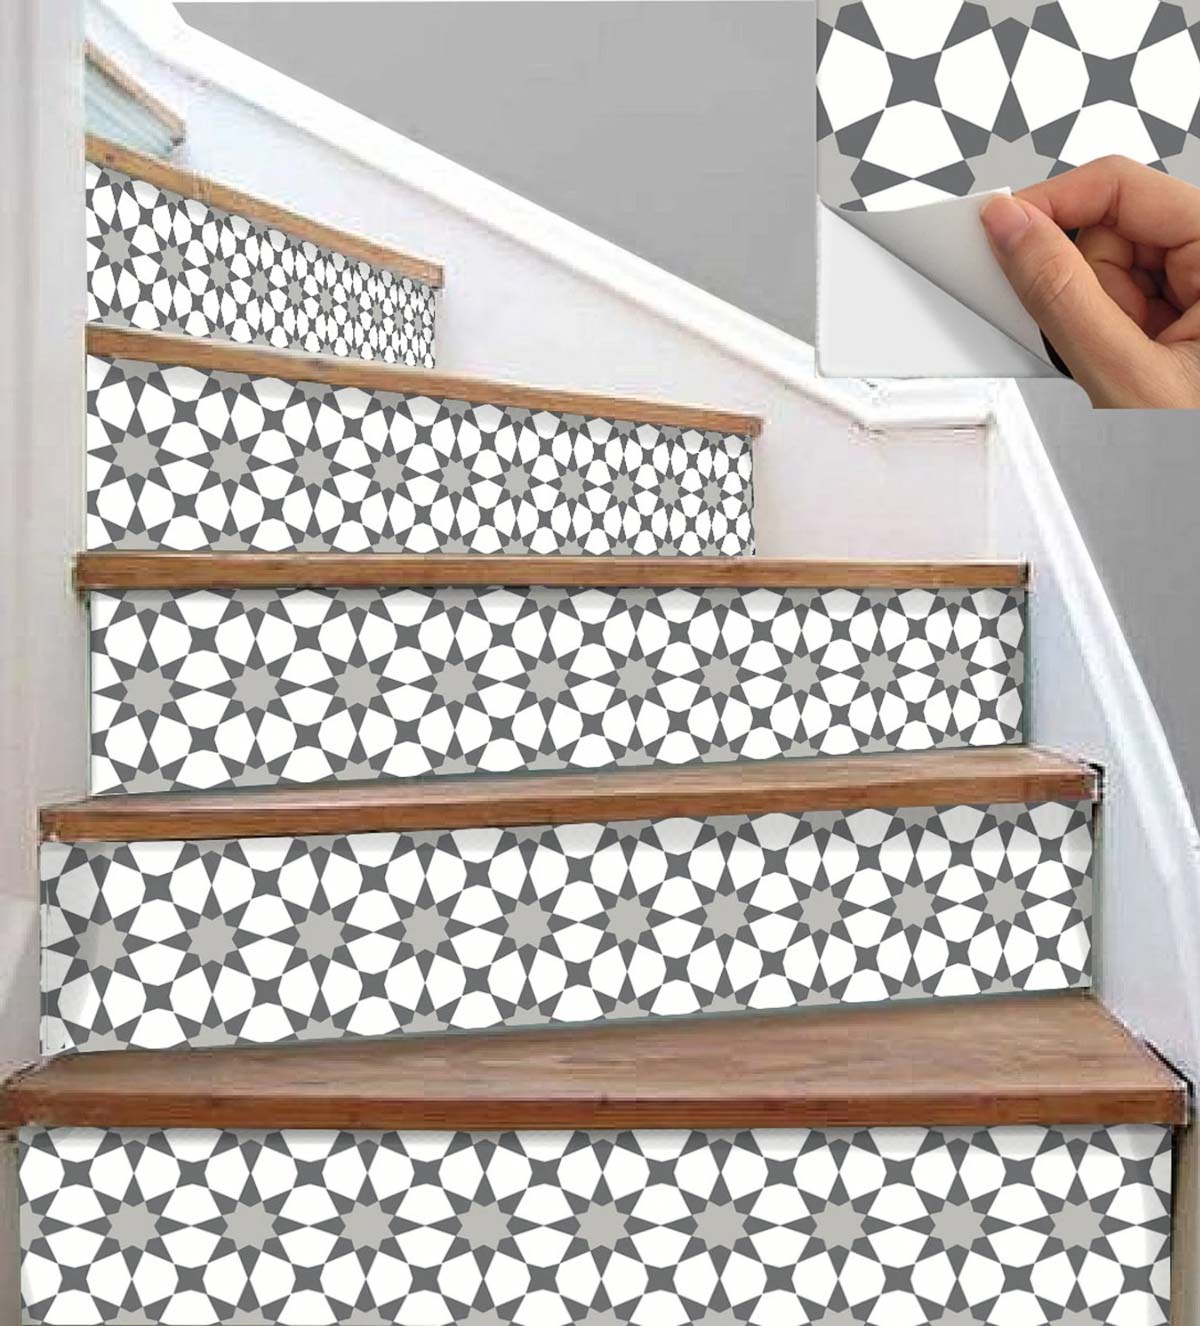 Patterned stair risers